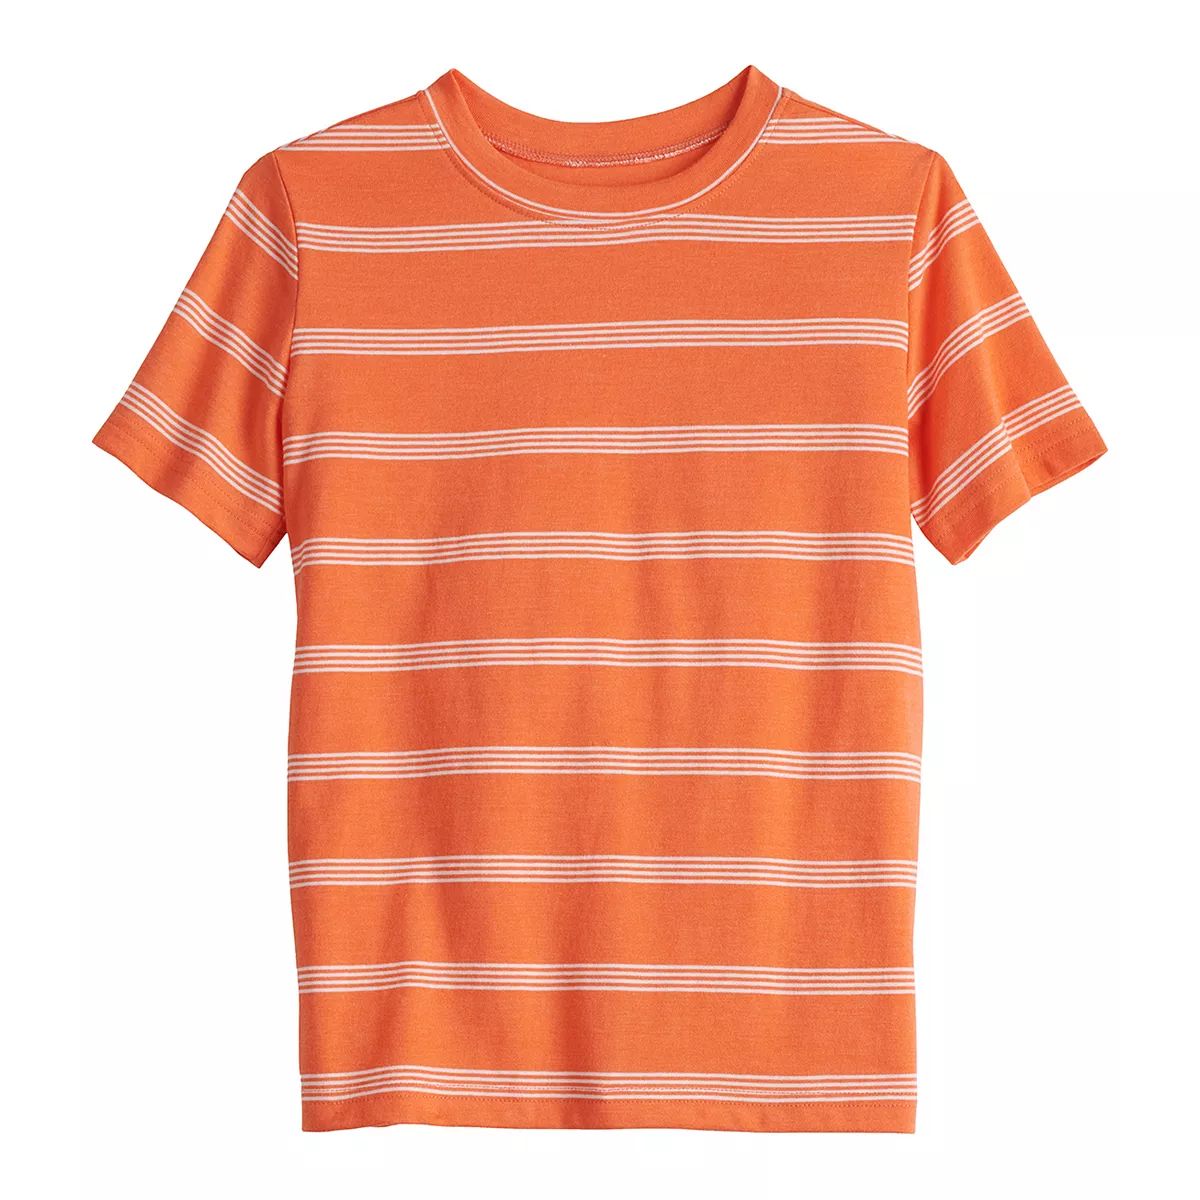 Boys 4-8 Jumping Beans® Essential Striped Tee | Kohl's